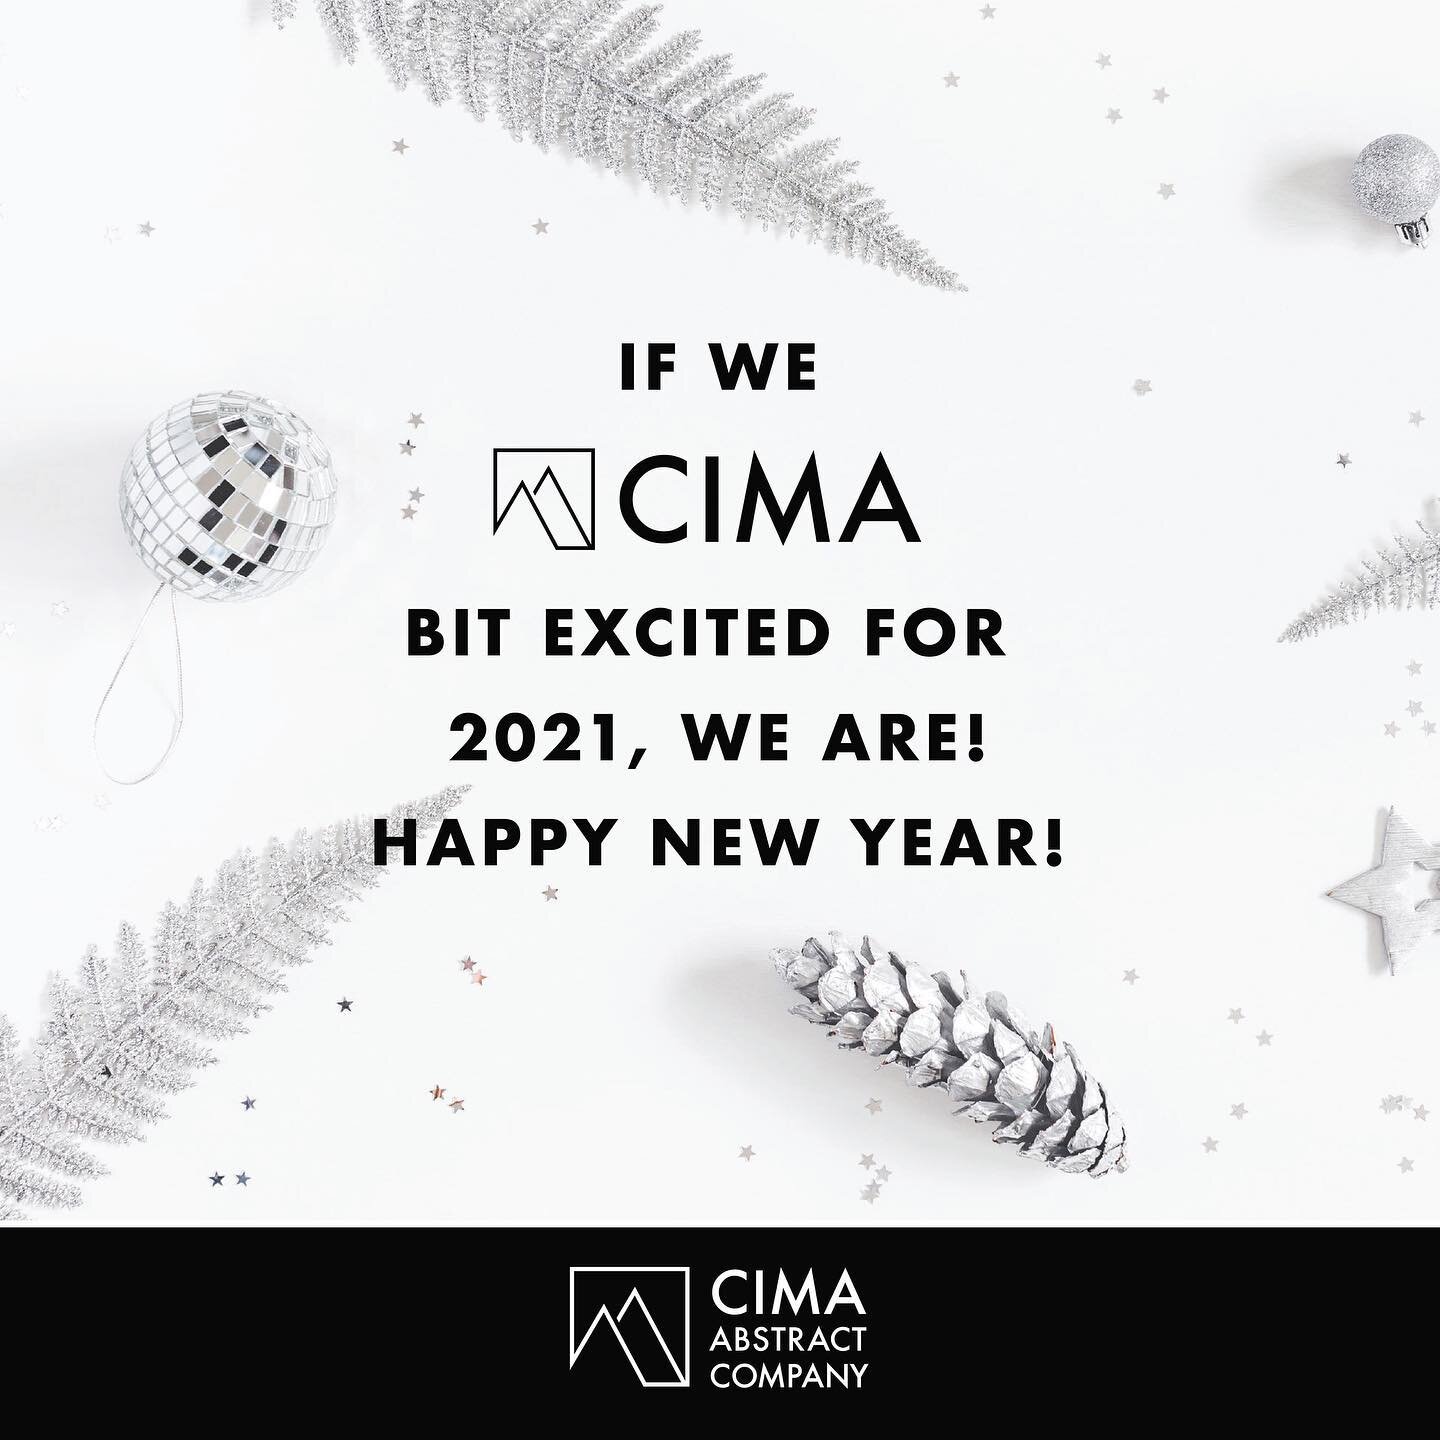 If we CIMA bit excited for 2021, it&rsquo;s because we are! Looking forward to all that this new year will bring and excited to serve y&rsquo;all in our new office space at 214 North Austin Street, Comanche, Texas 76442! Have a wonderful New Year&rsq